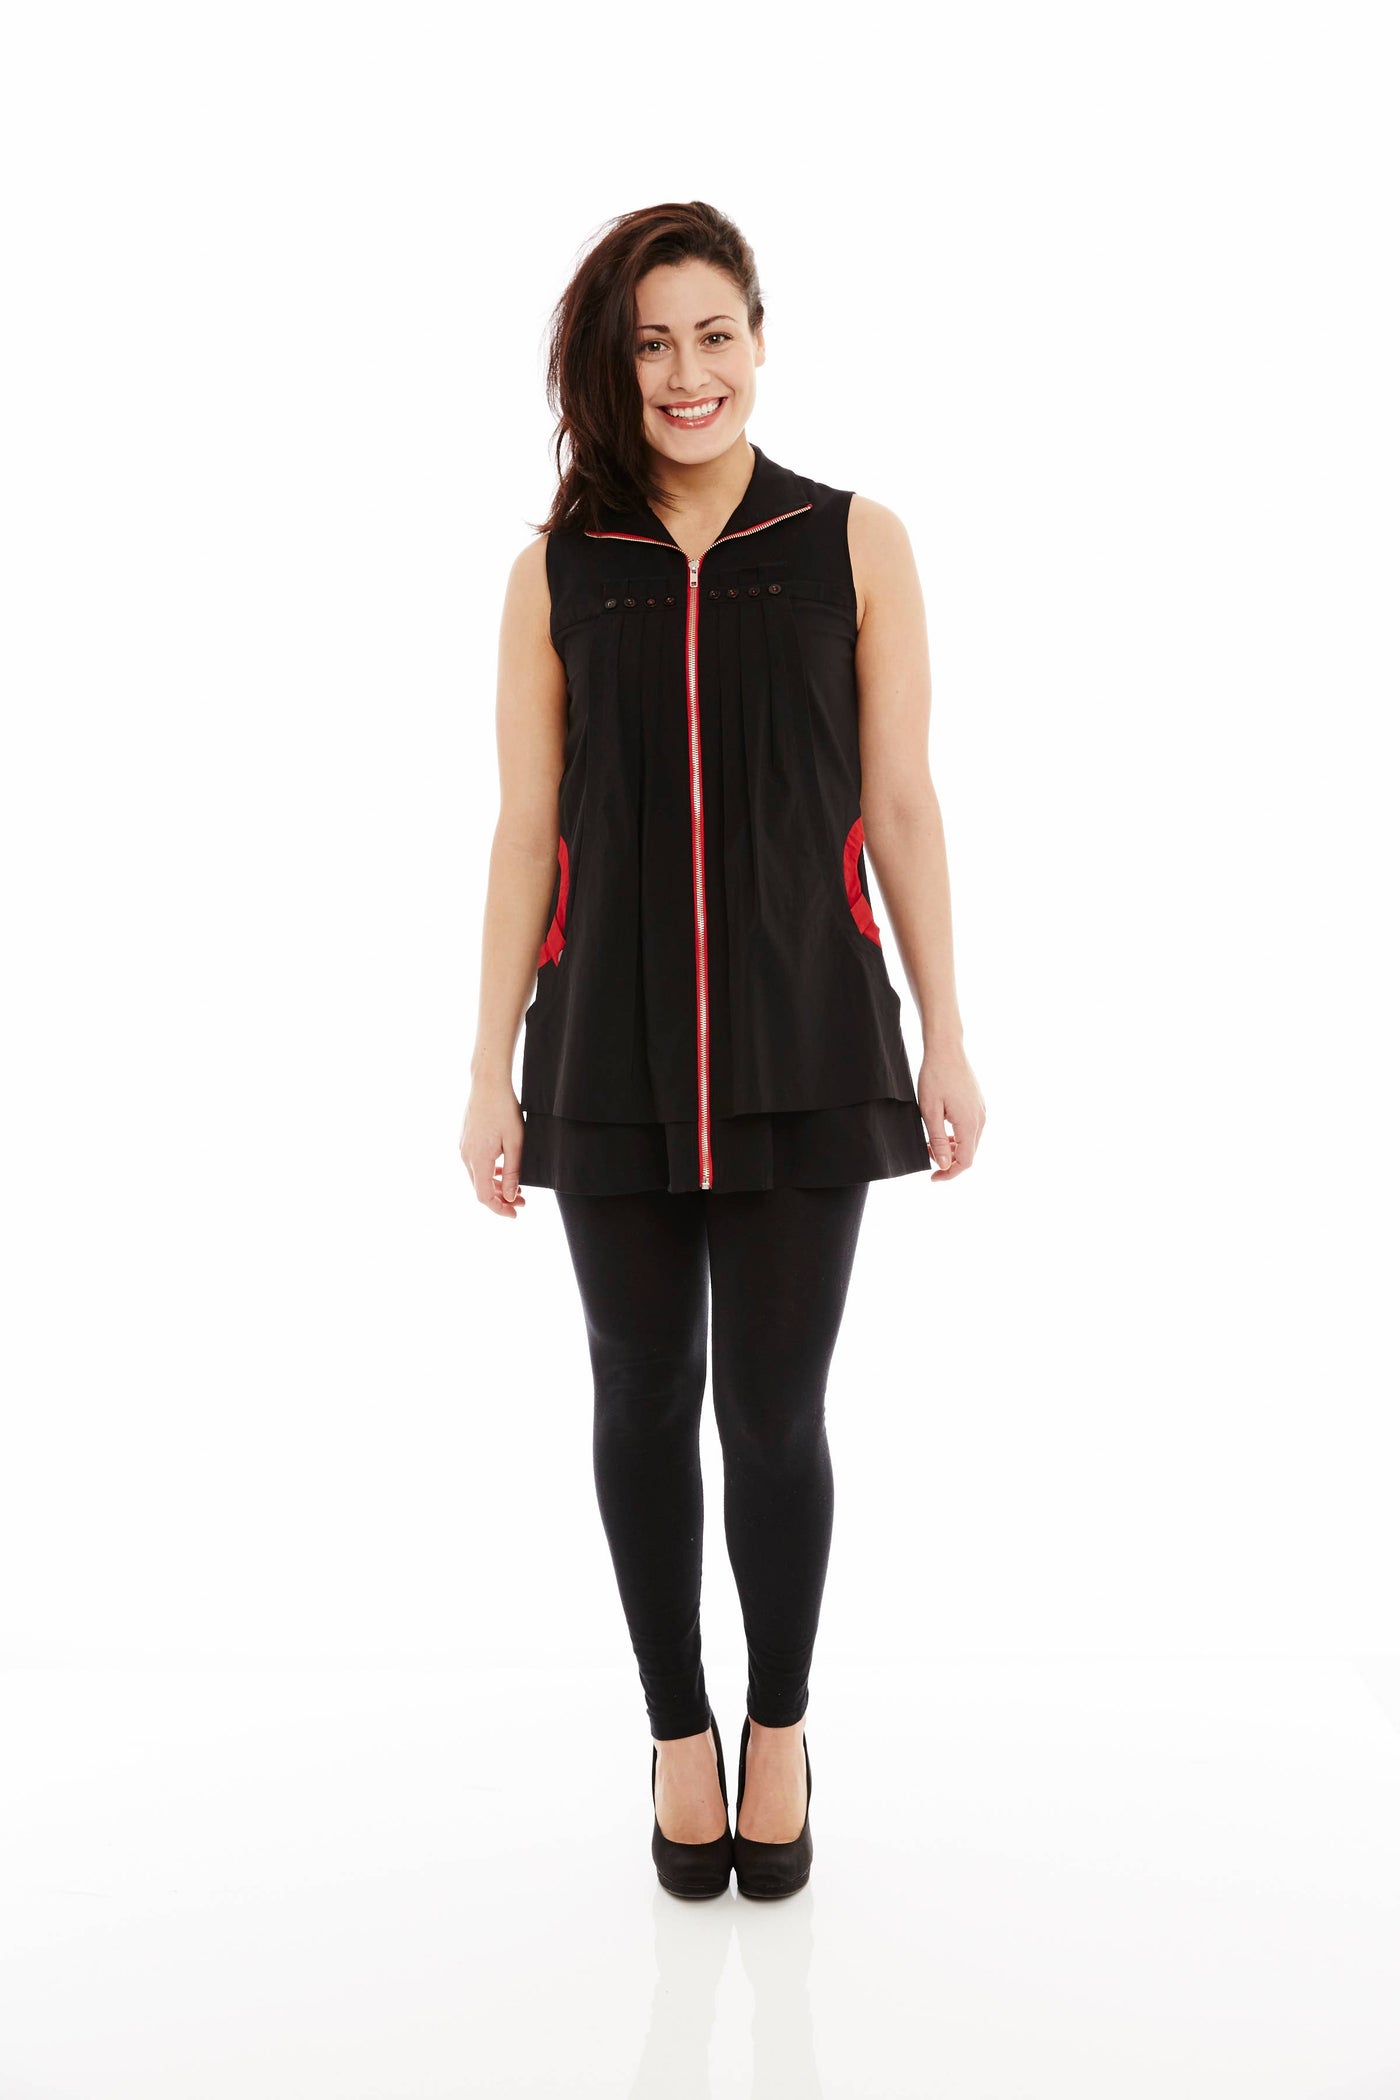 Buy Midi and Zip-Up Jackets Online for Women